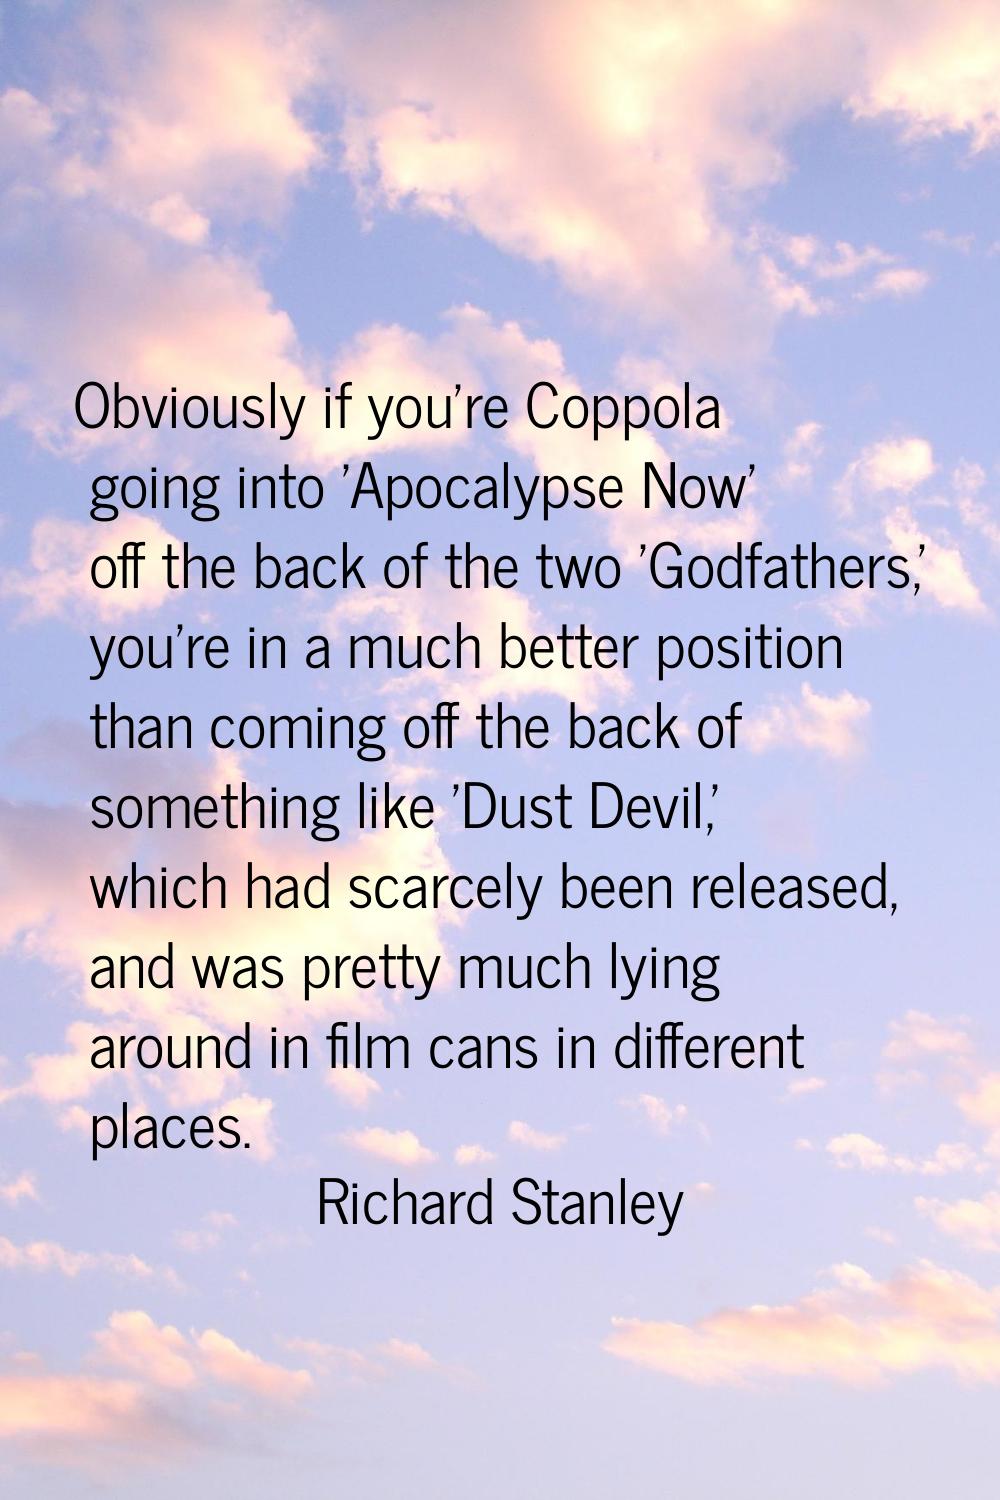 Obviously if you're Coppola going into 'Apocalypse Now' off the back of the two 'Godfathers,' you'r